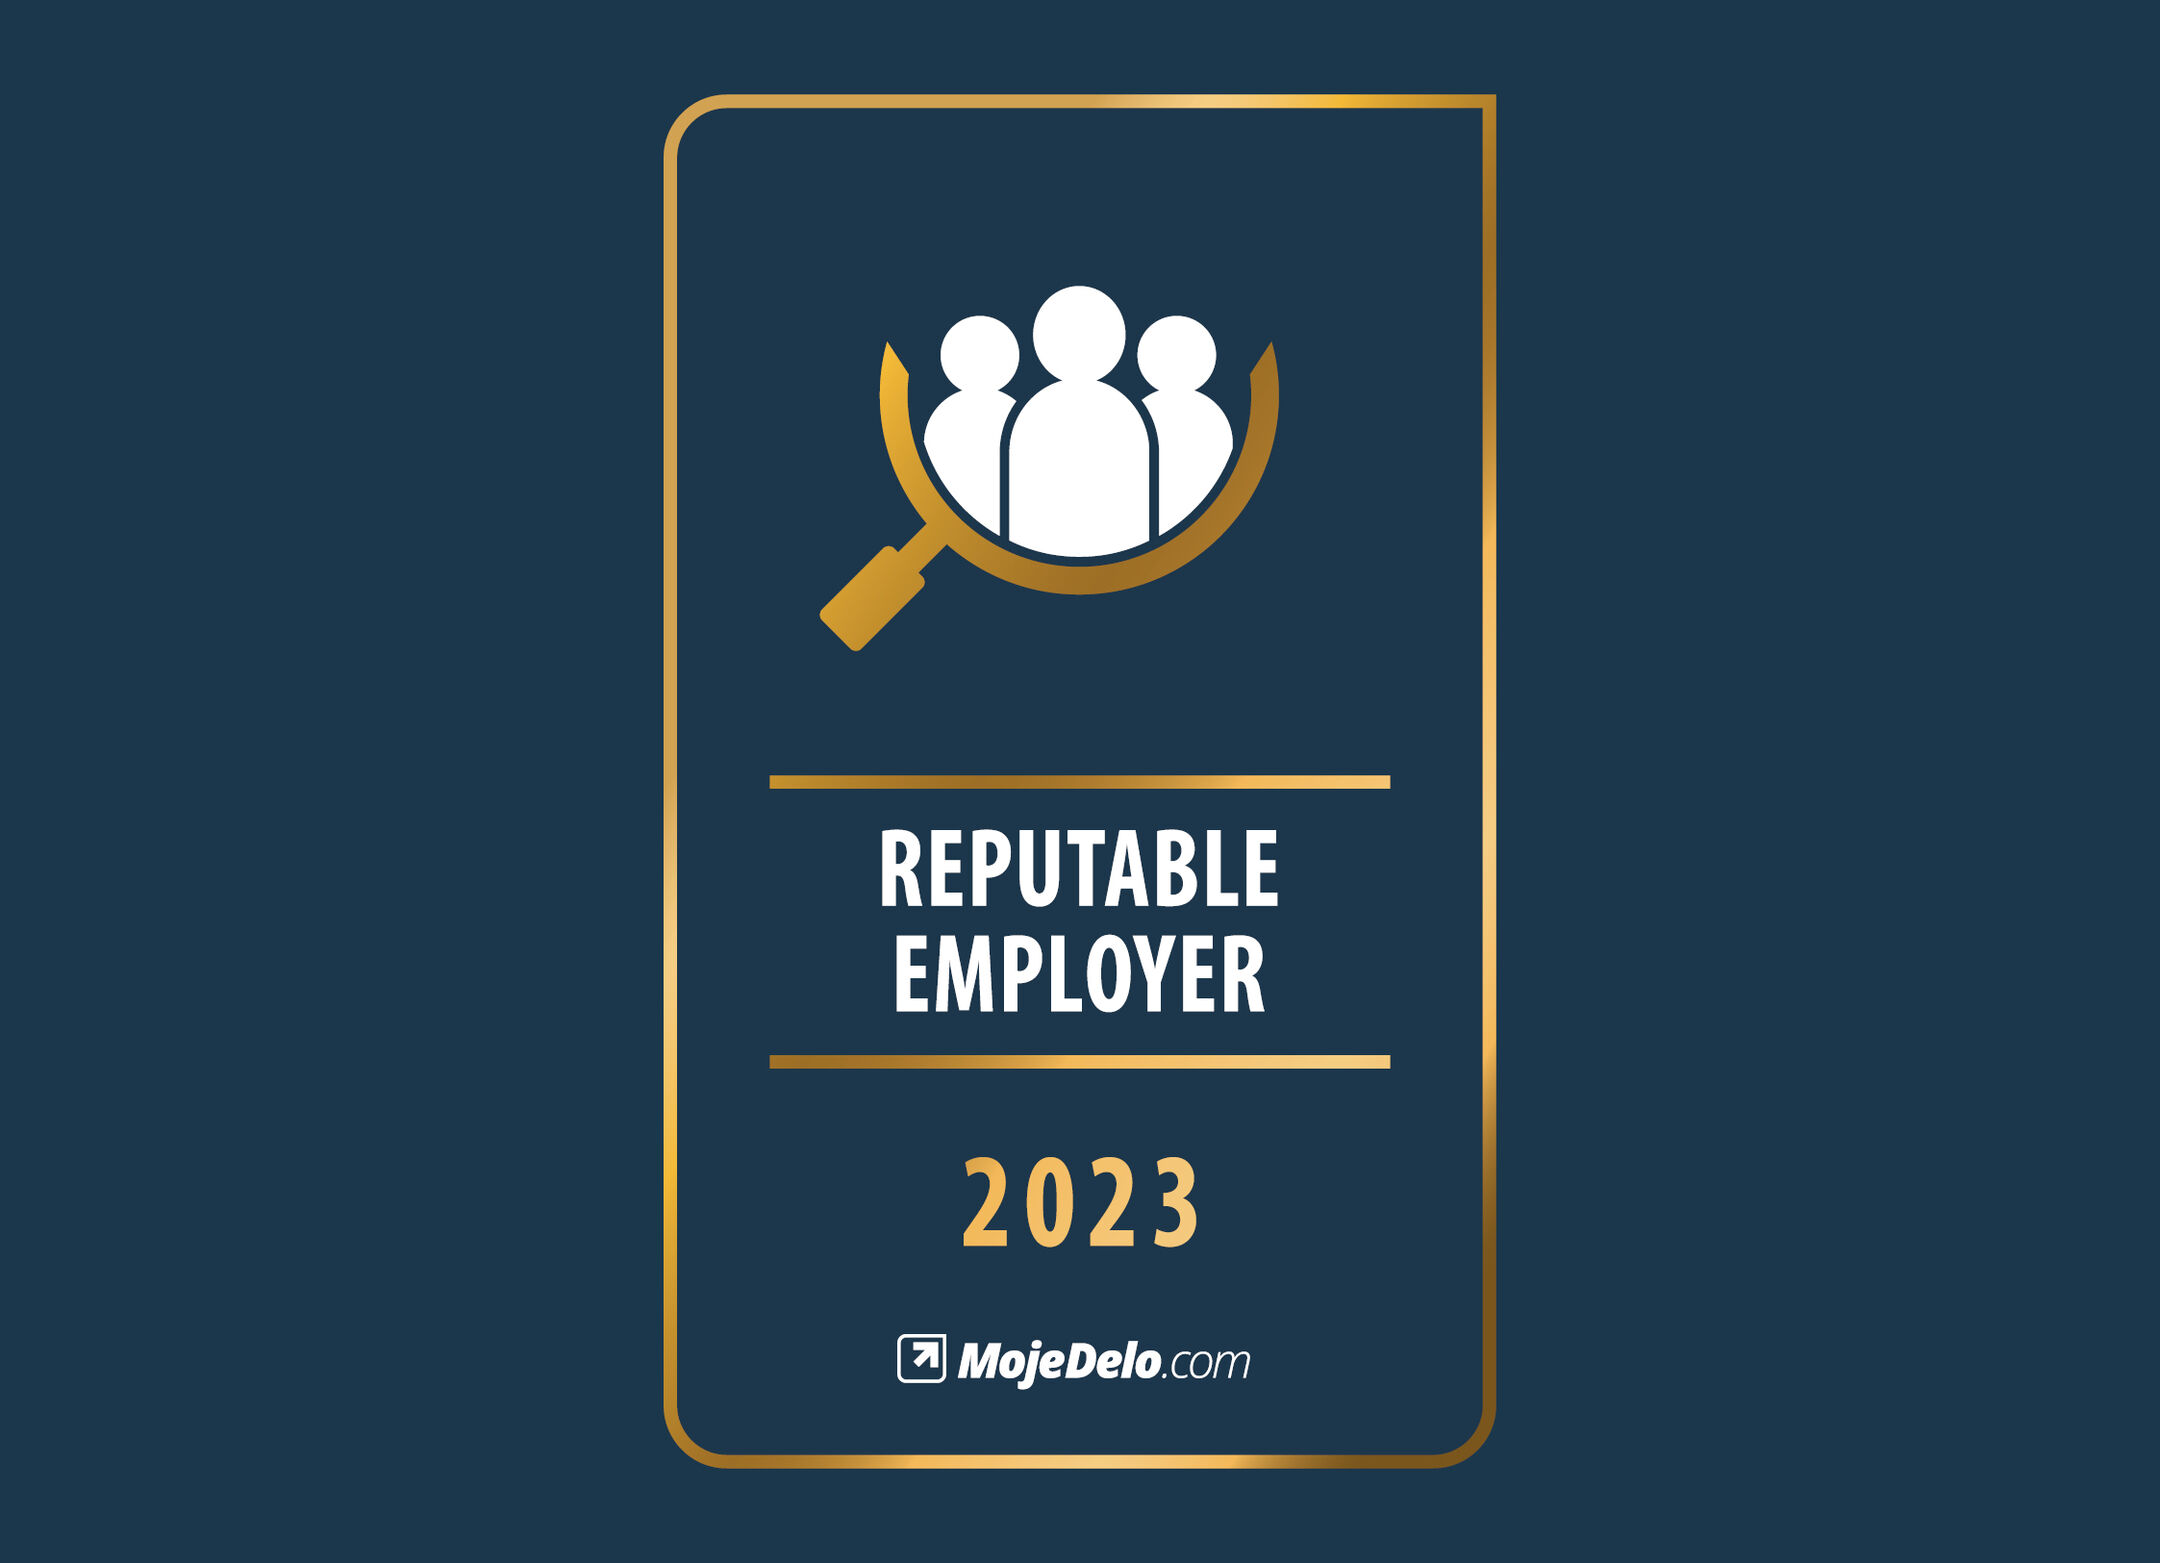 Cinkarna Celje - the most reputable employer 2023 in the field of the chemical industry